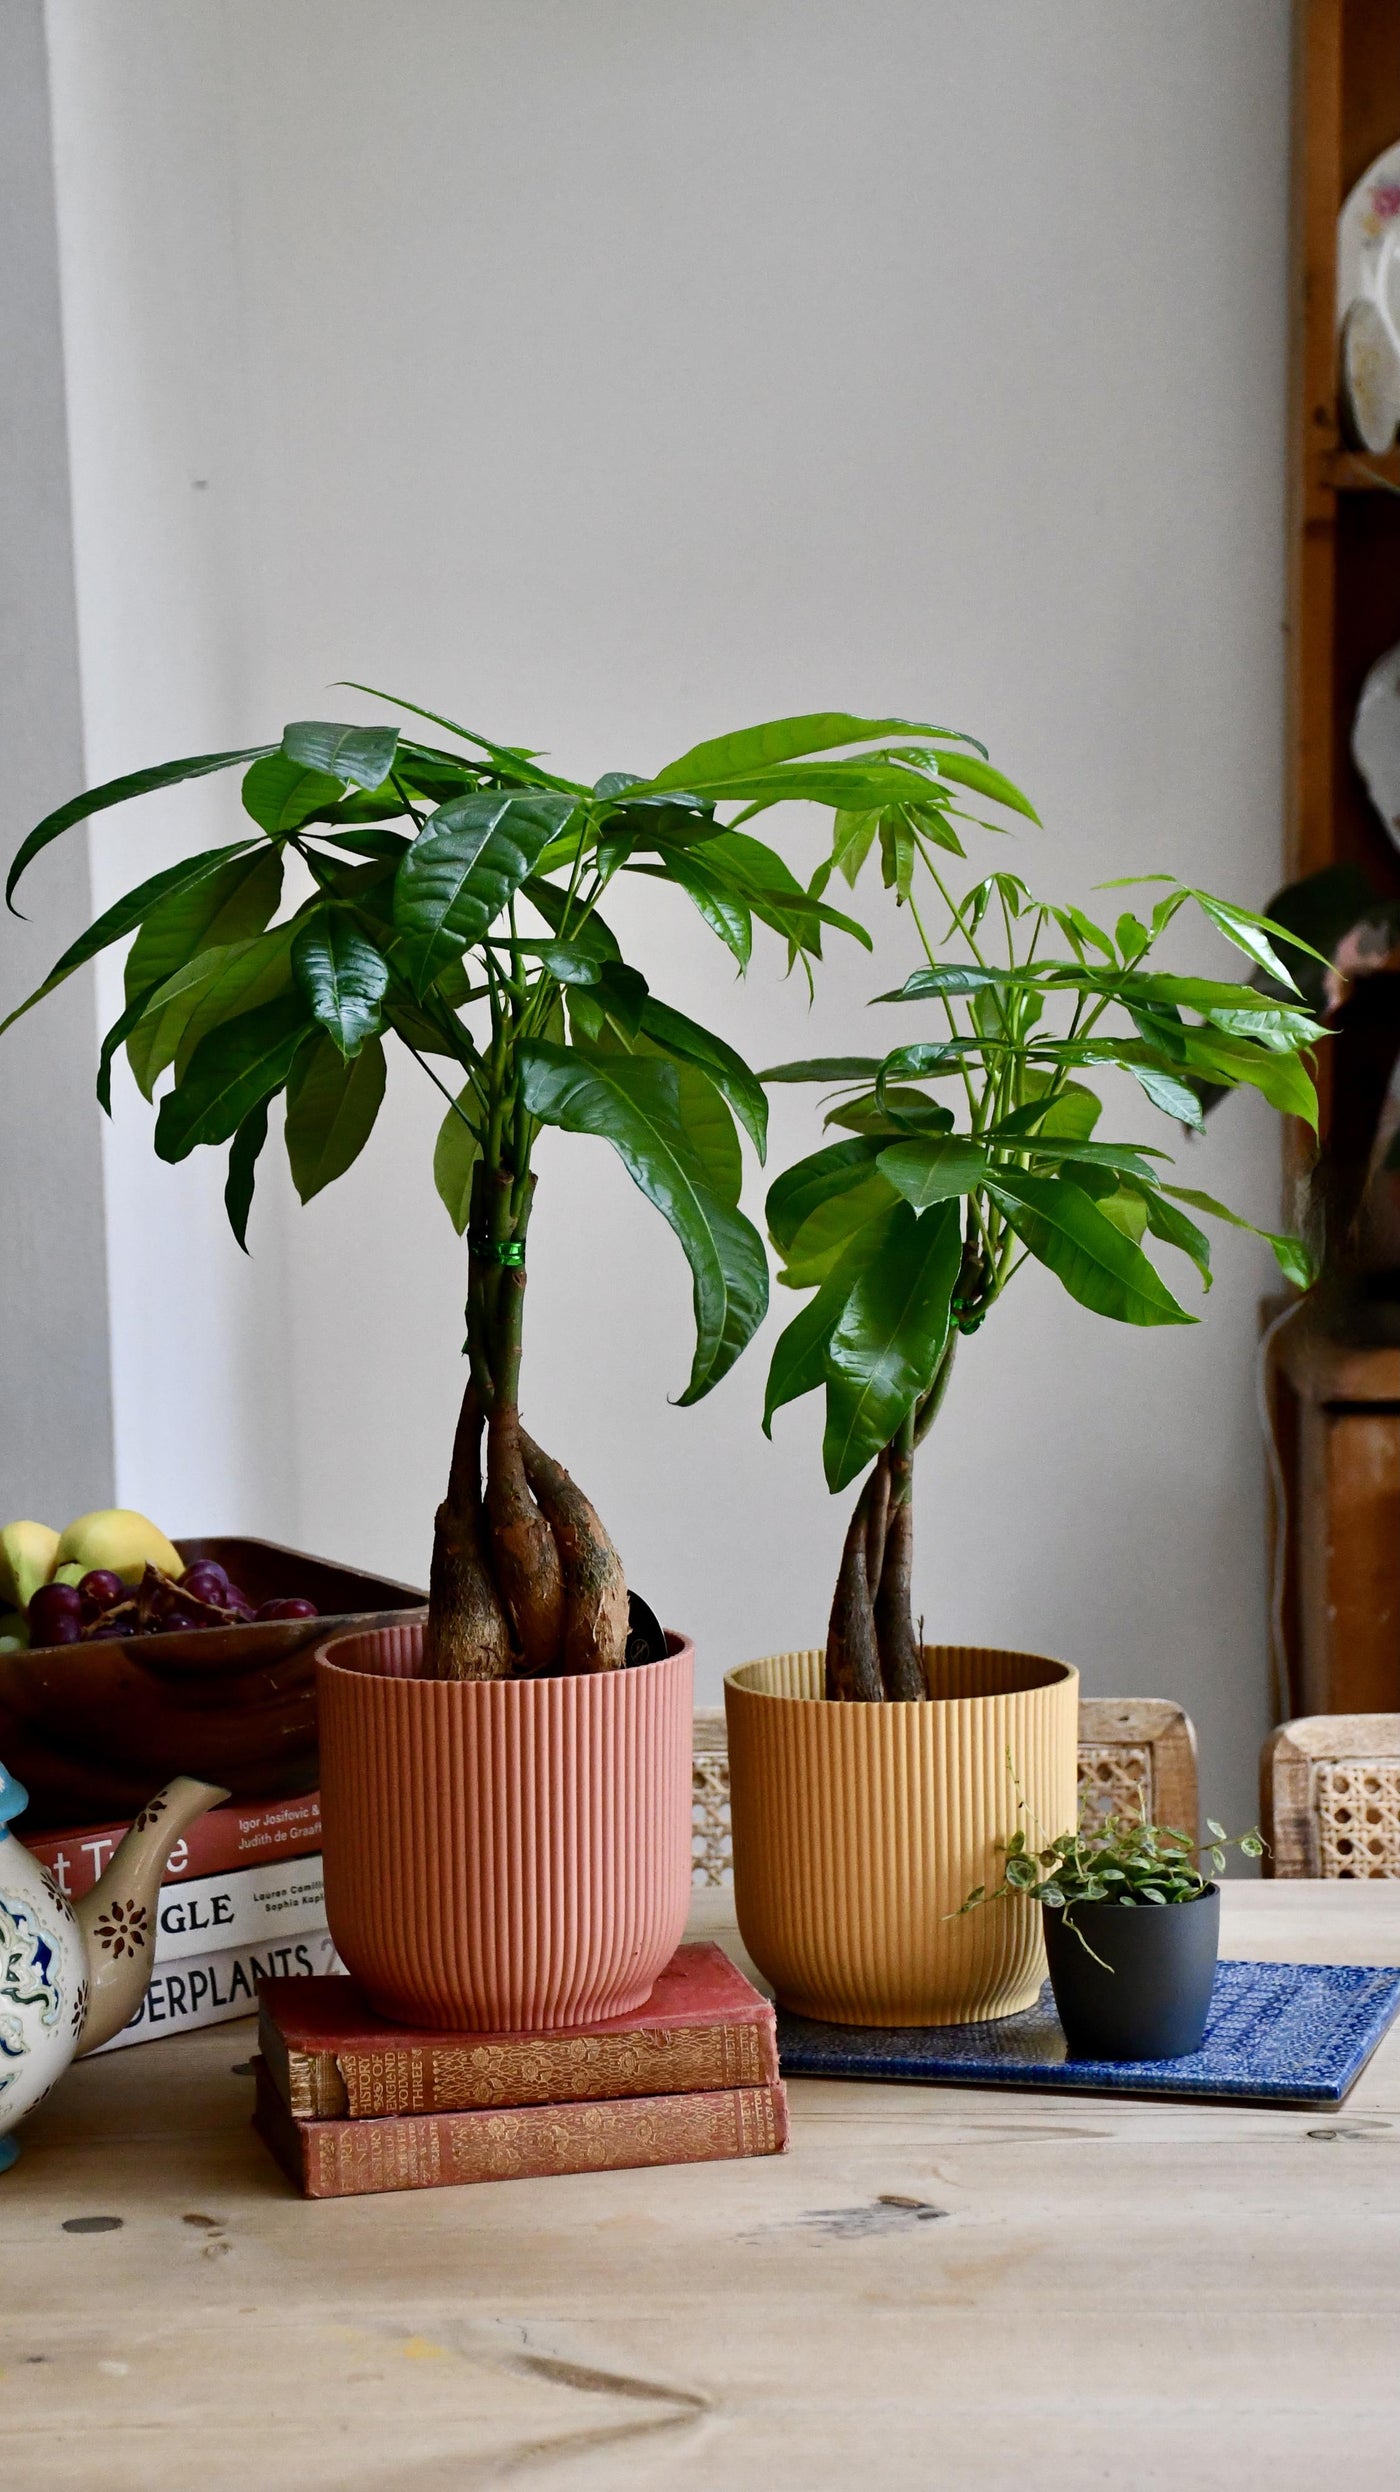 Baby Mexican Fortune Tree or Pachira Aquatica & Vibes Pot